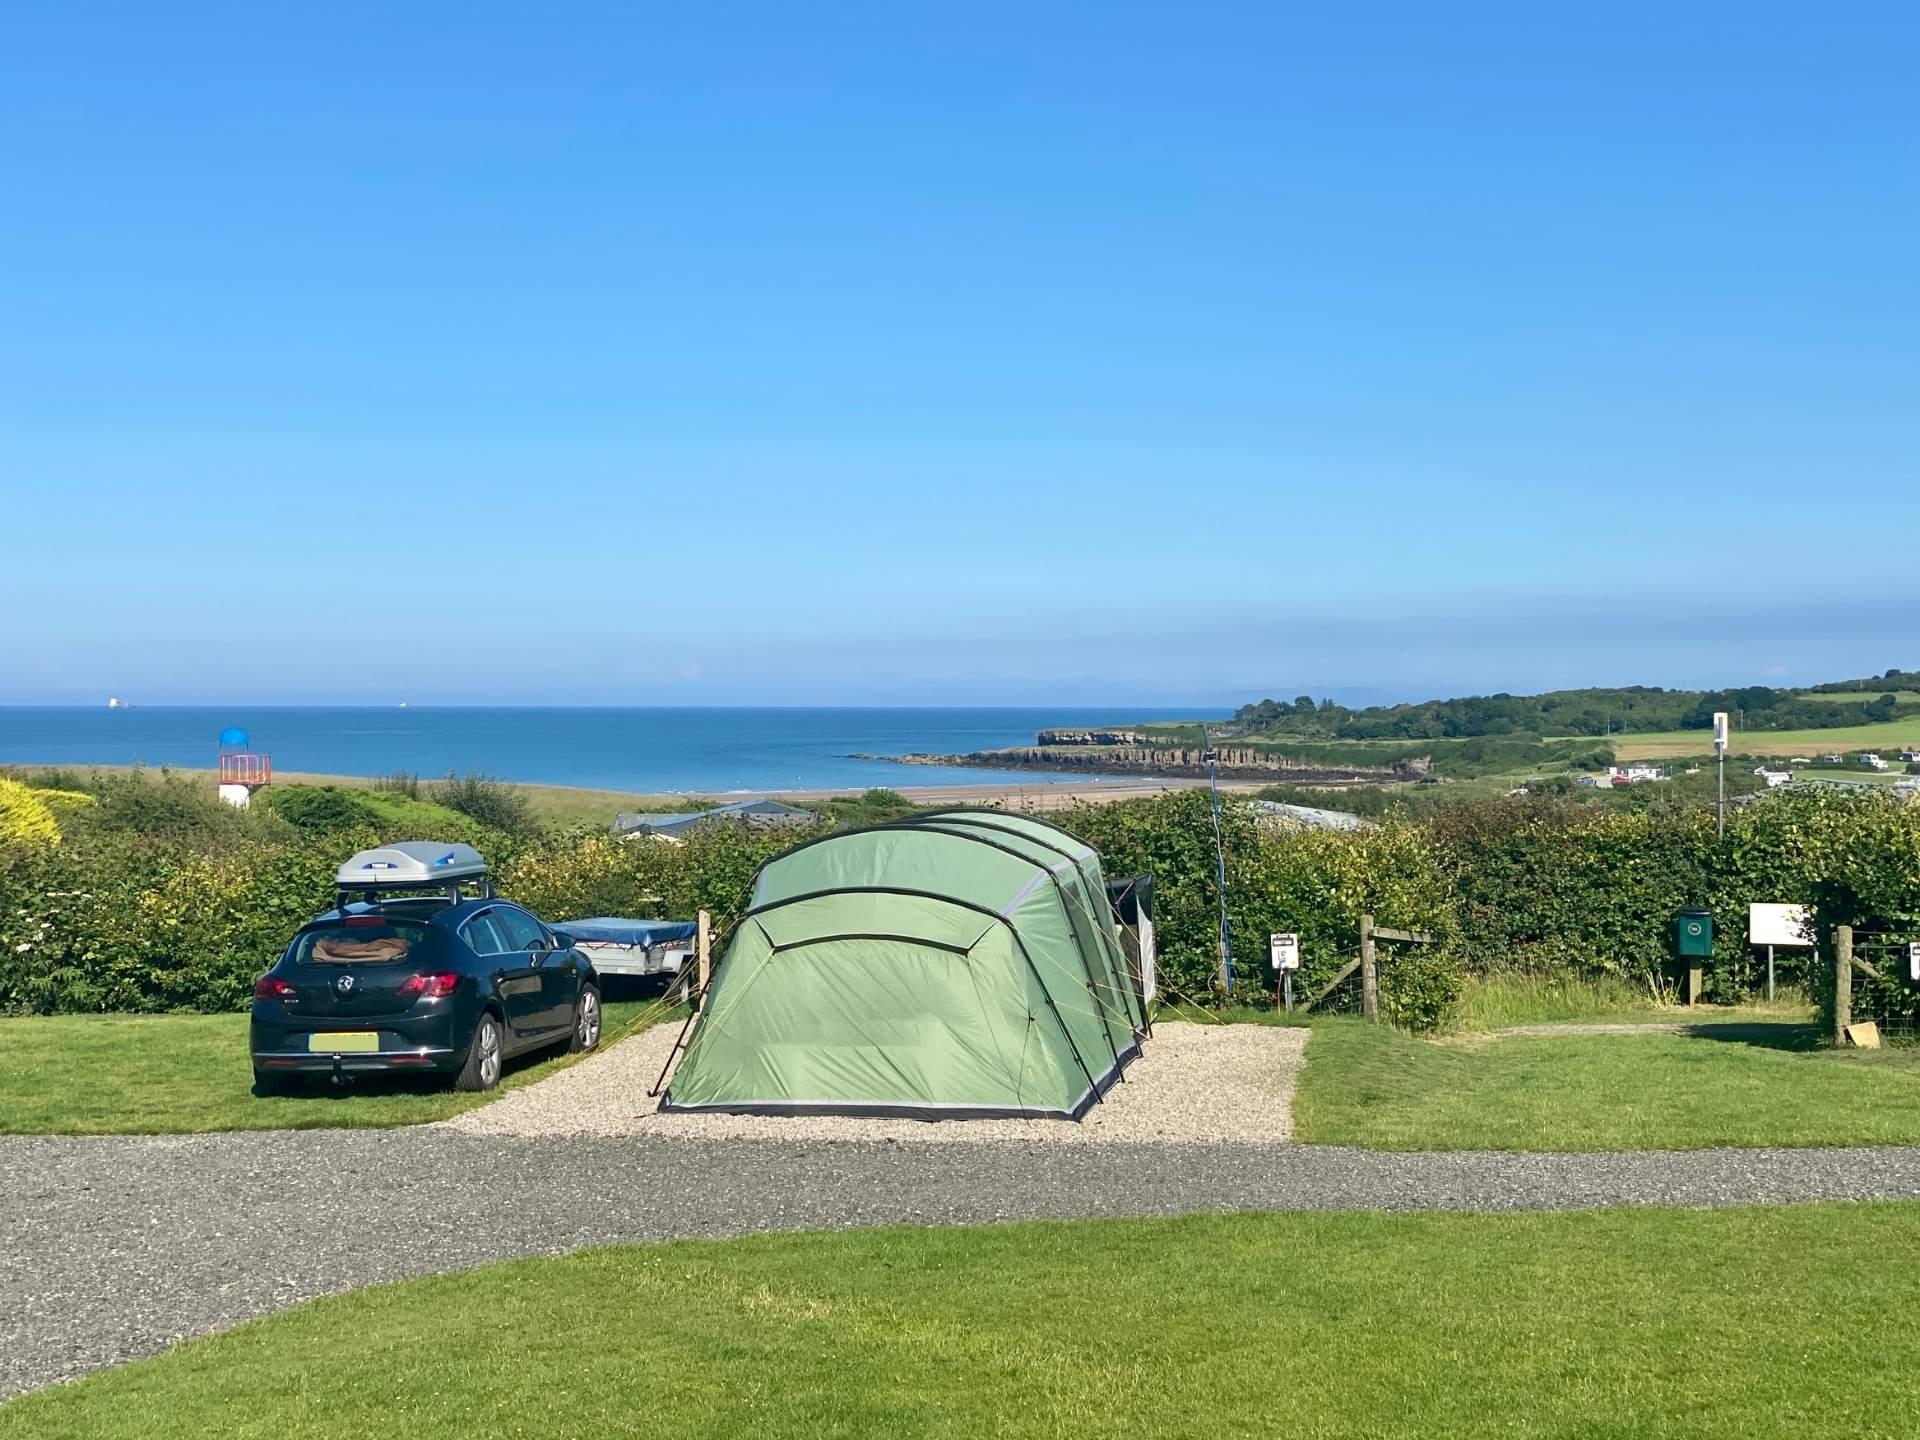 Camping, touring & motorhome pitches